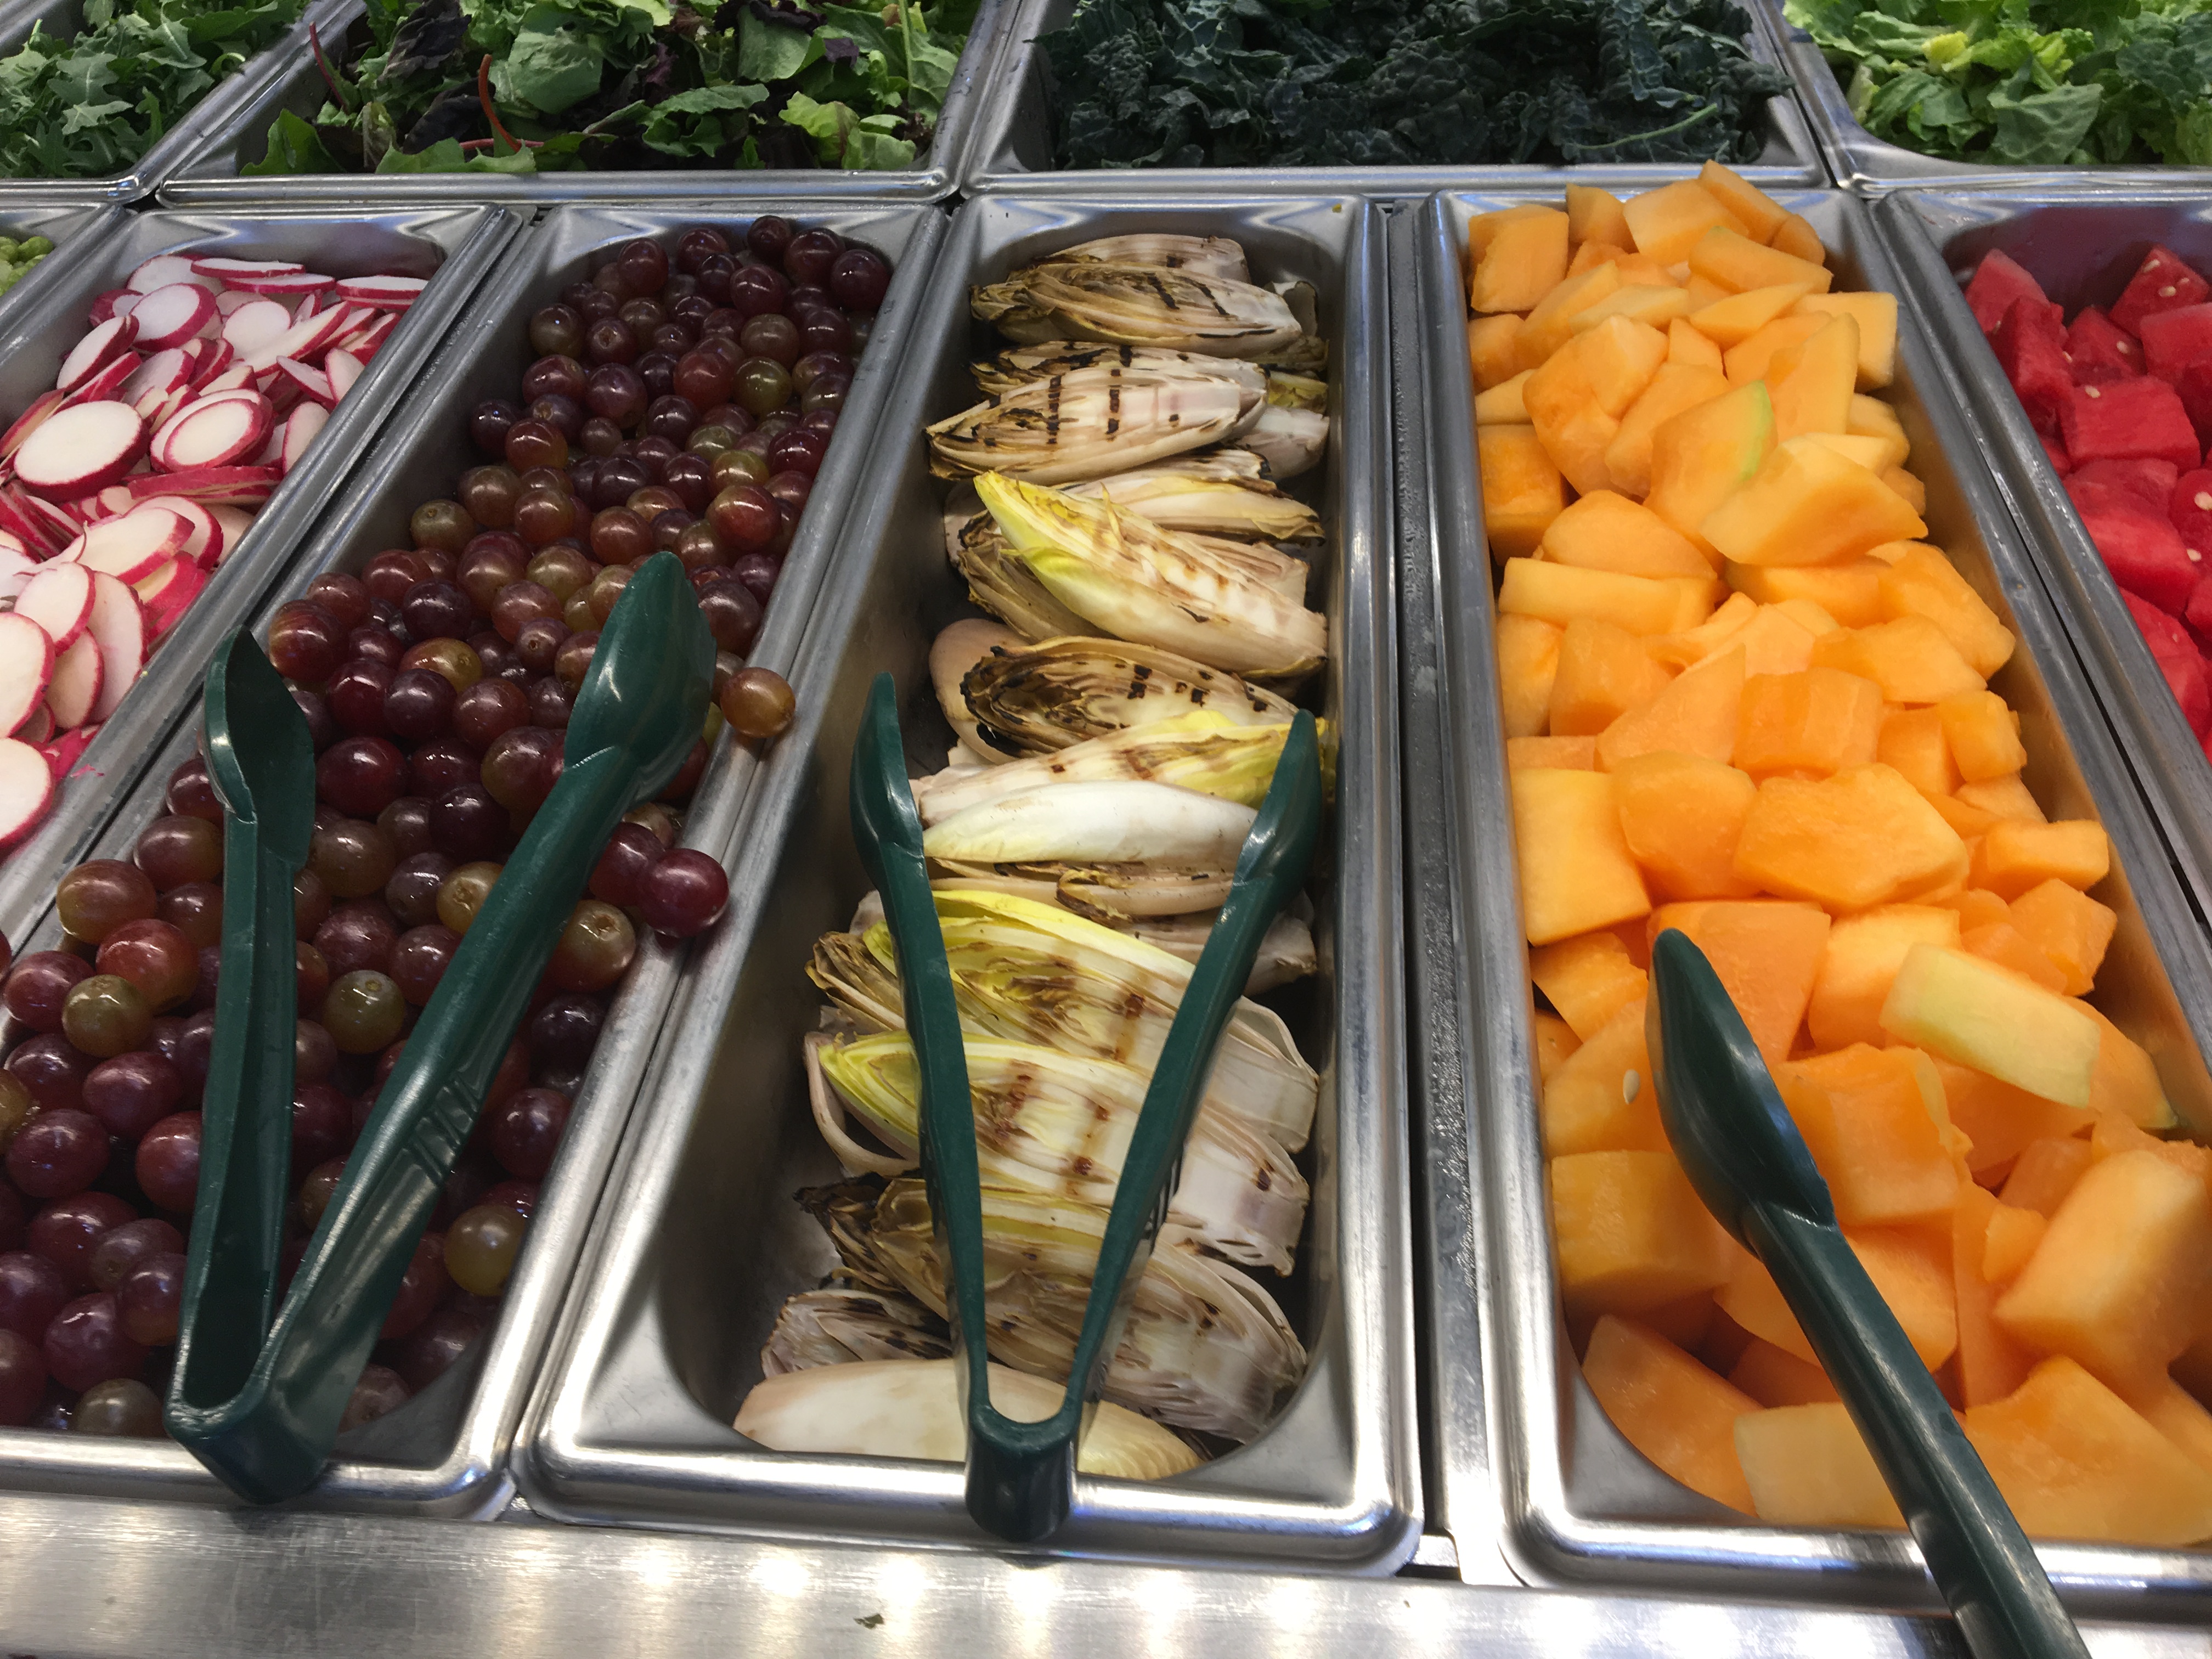 15 Popular Items From The Whole Foods Hot Bar, Ranked